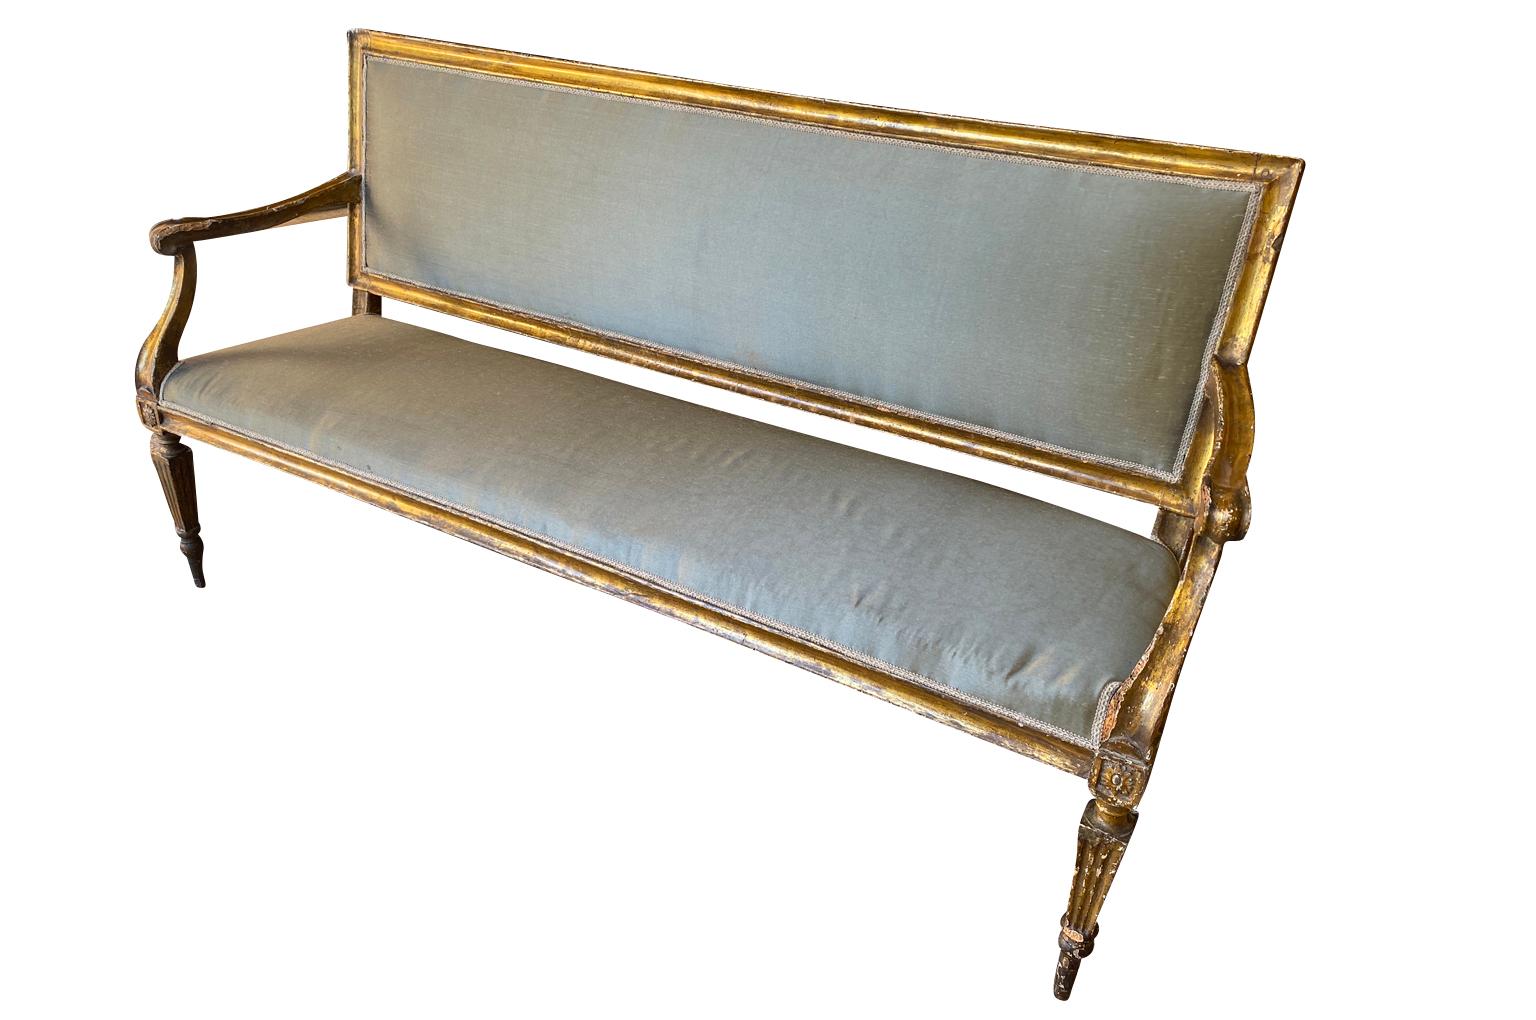 Giltwood Pair Of Louis XVI Period Banquettes - Canapes